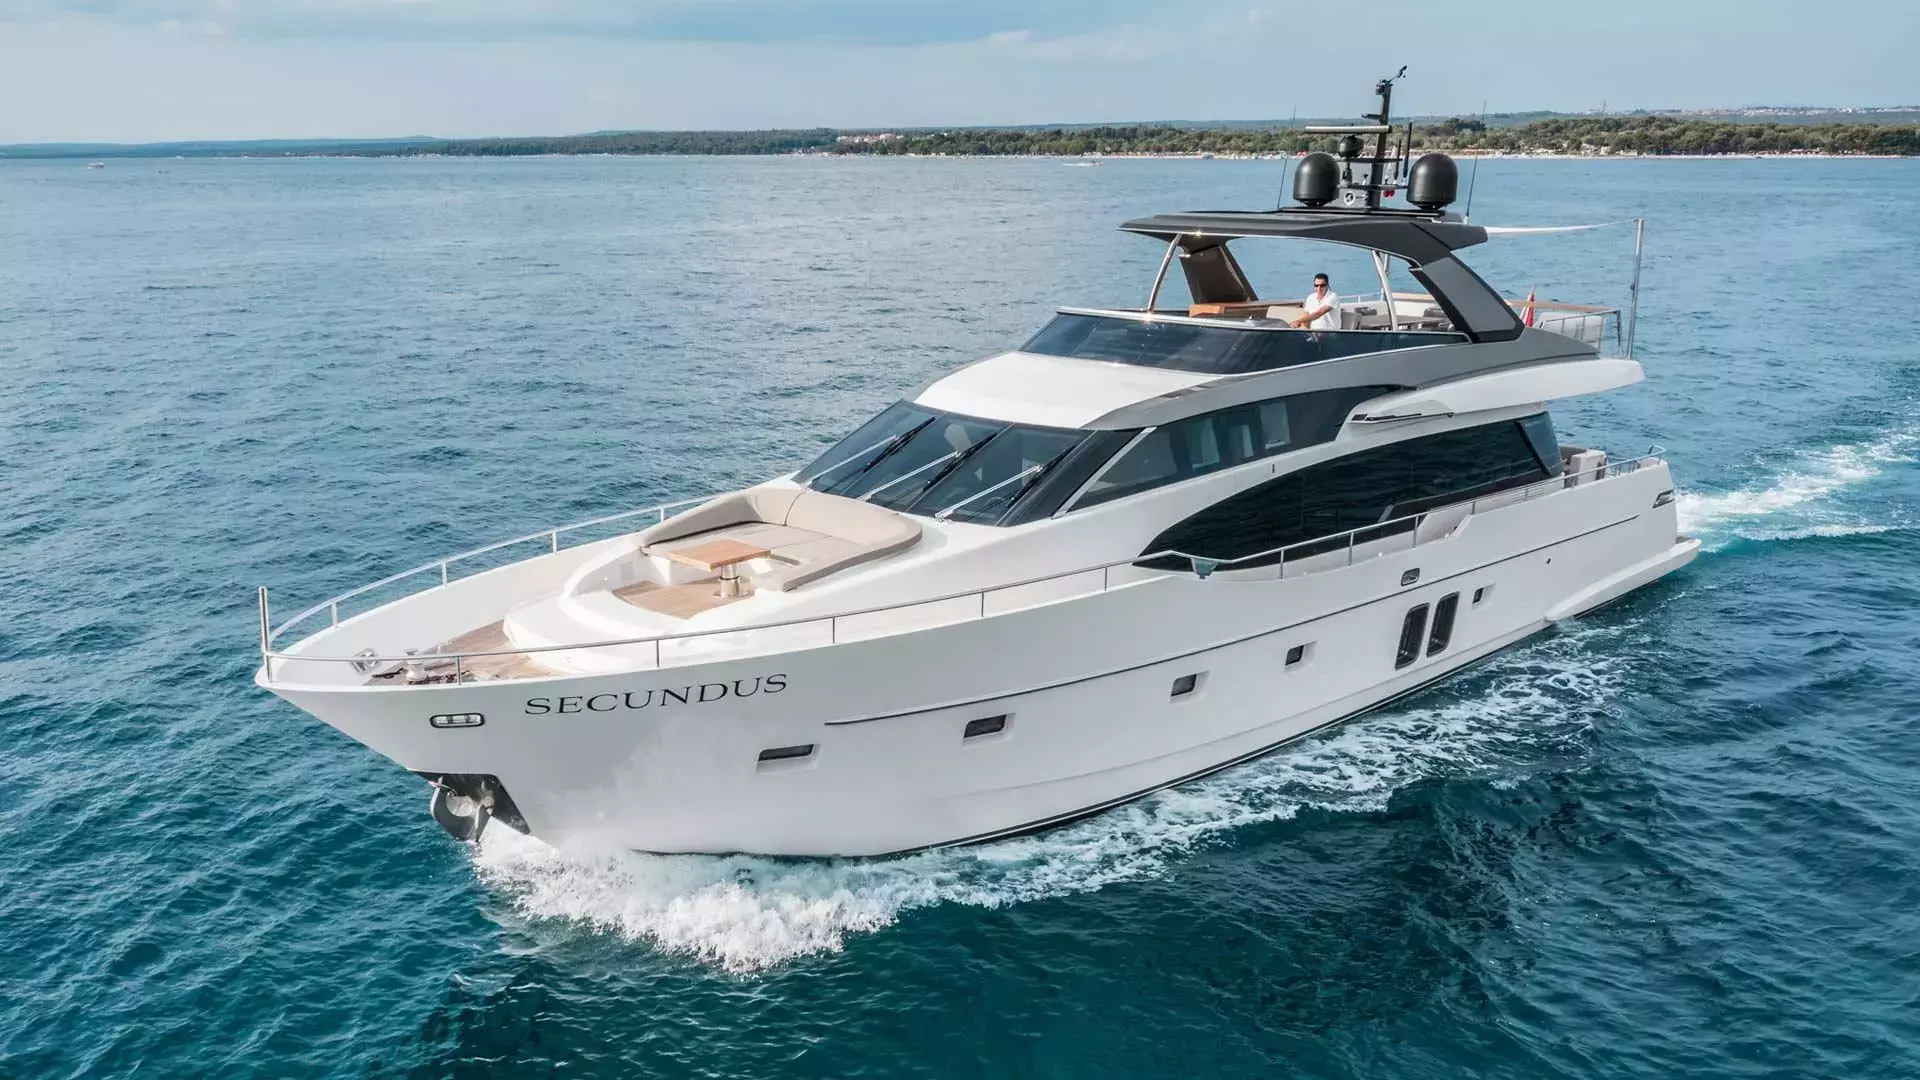 Secundus by Sanlorenzo - Top rates for a Charter of a private Motor Yacht in Malta